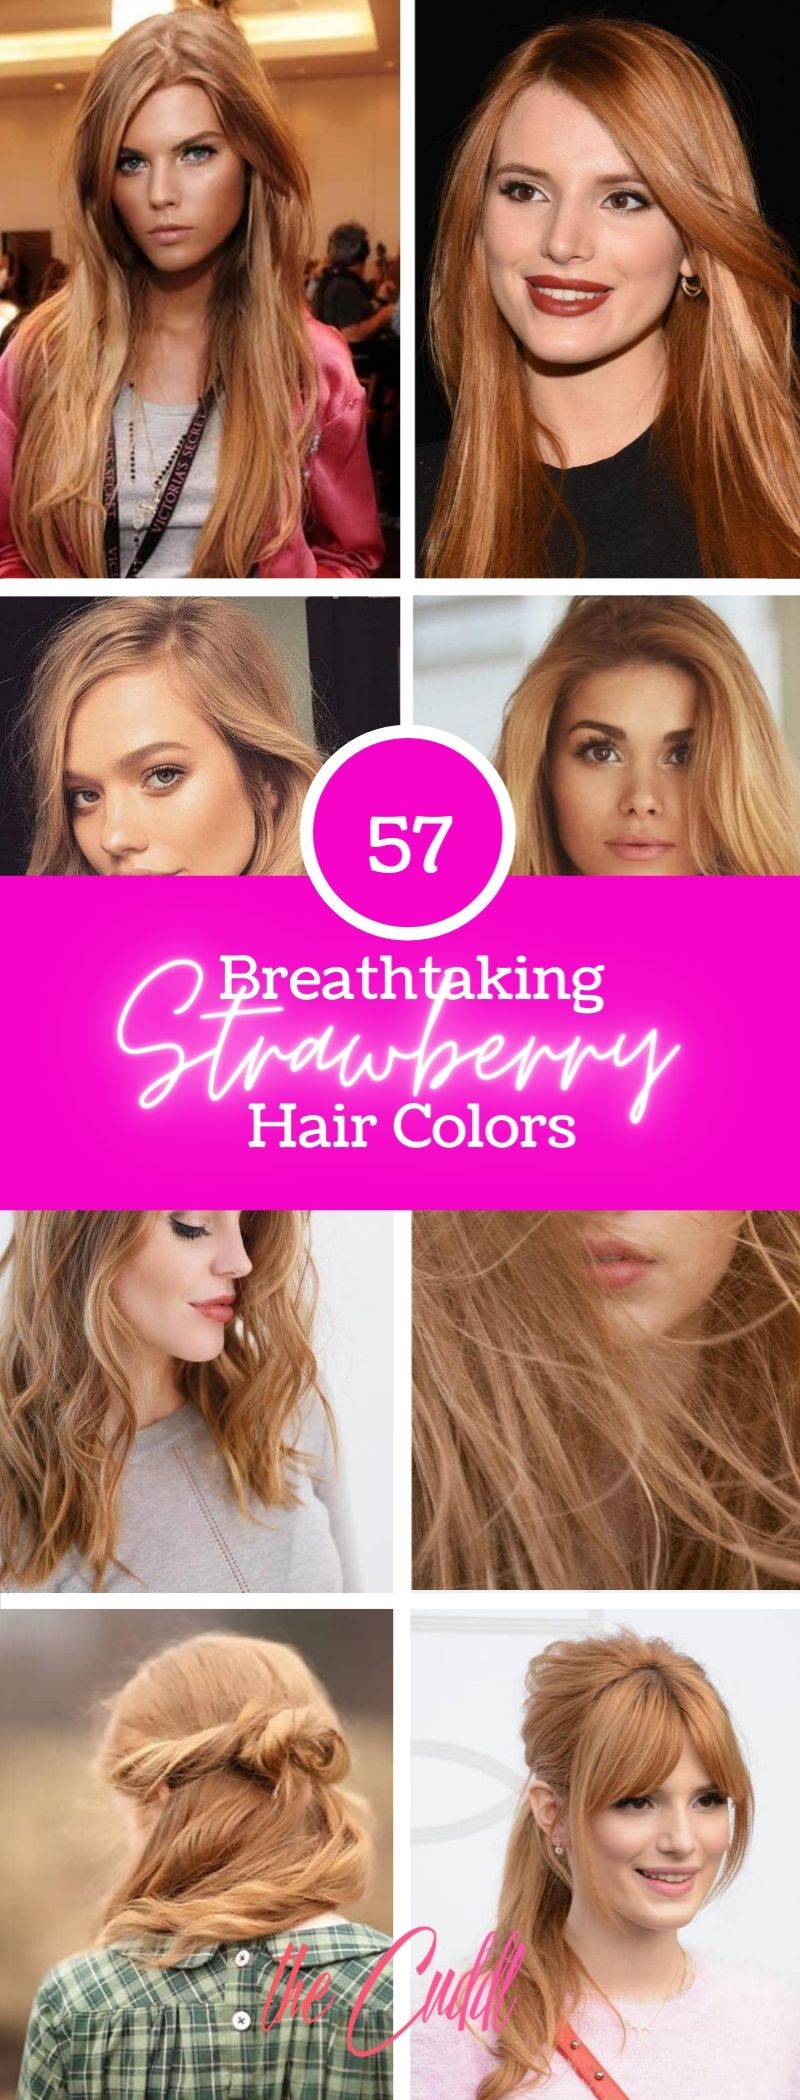 50 Amazing Inspiration Ideas for Your Strawberry Blonde Hair